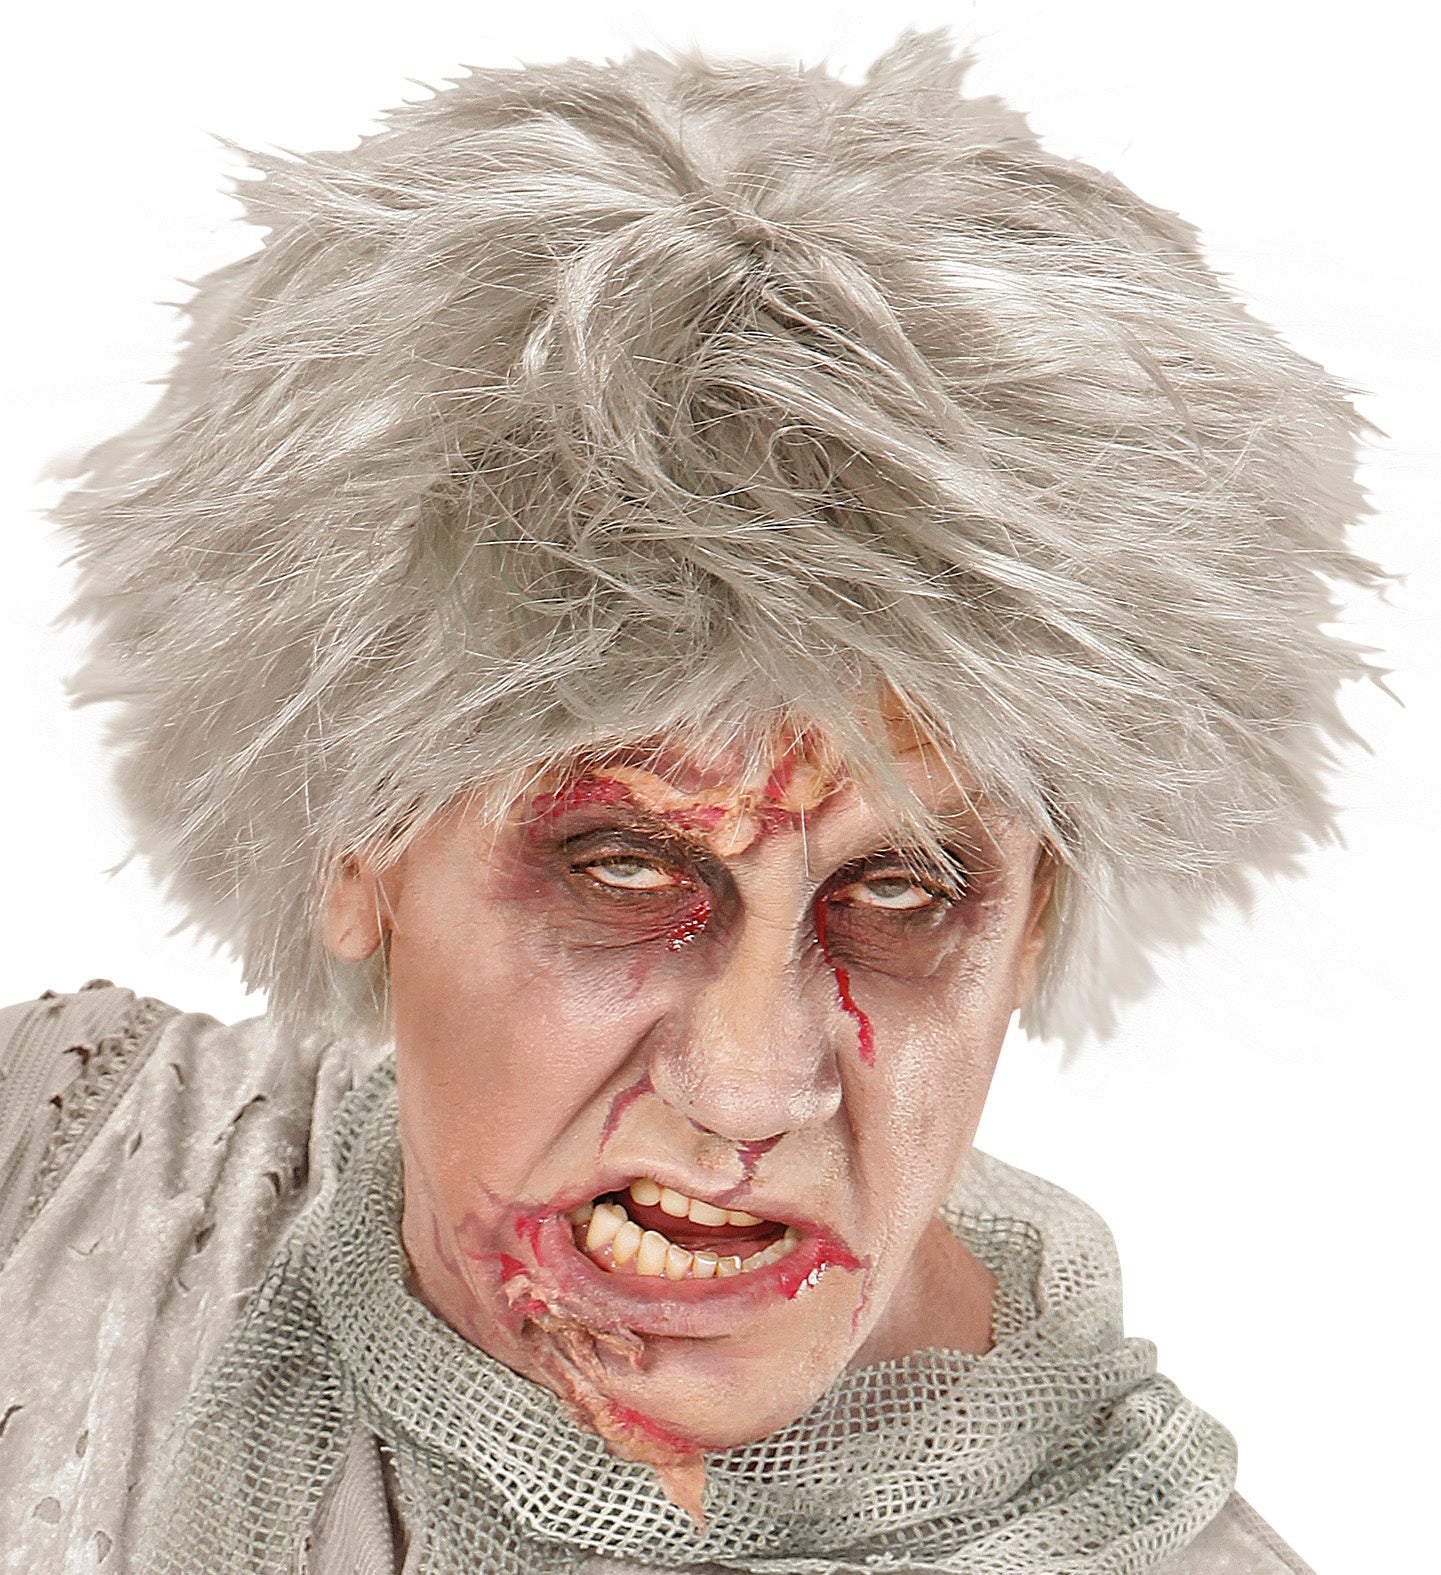 Andy or Zombie Grey Wig